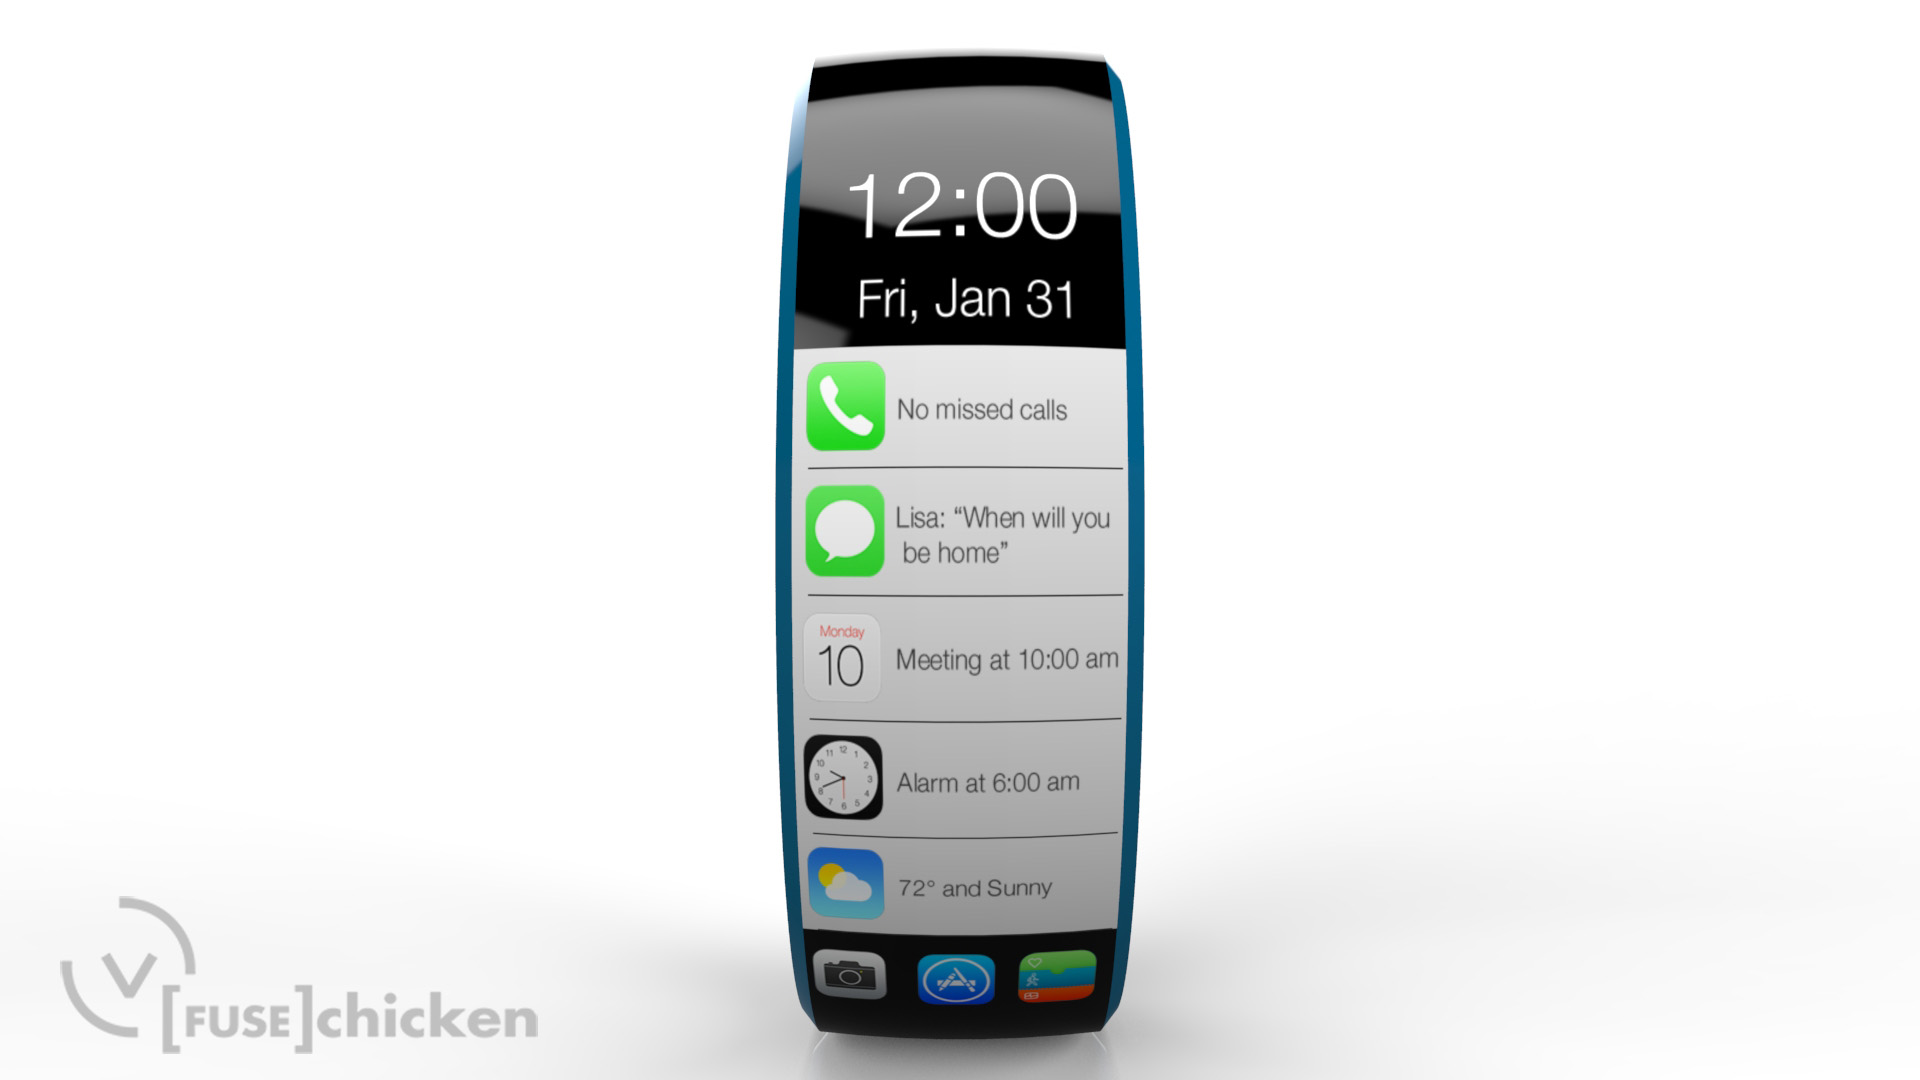 Apple is working on a major iPhone 5 and iPhone 5s accessory. This concept from FuseChicken shows one look for an iWatch.